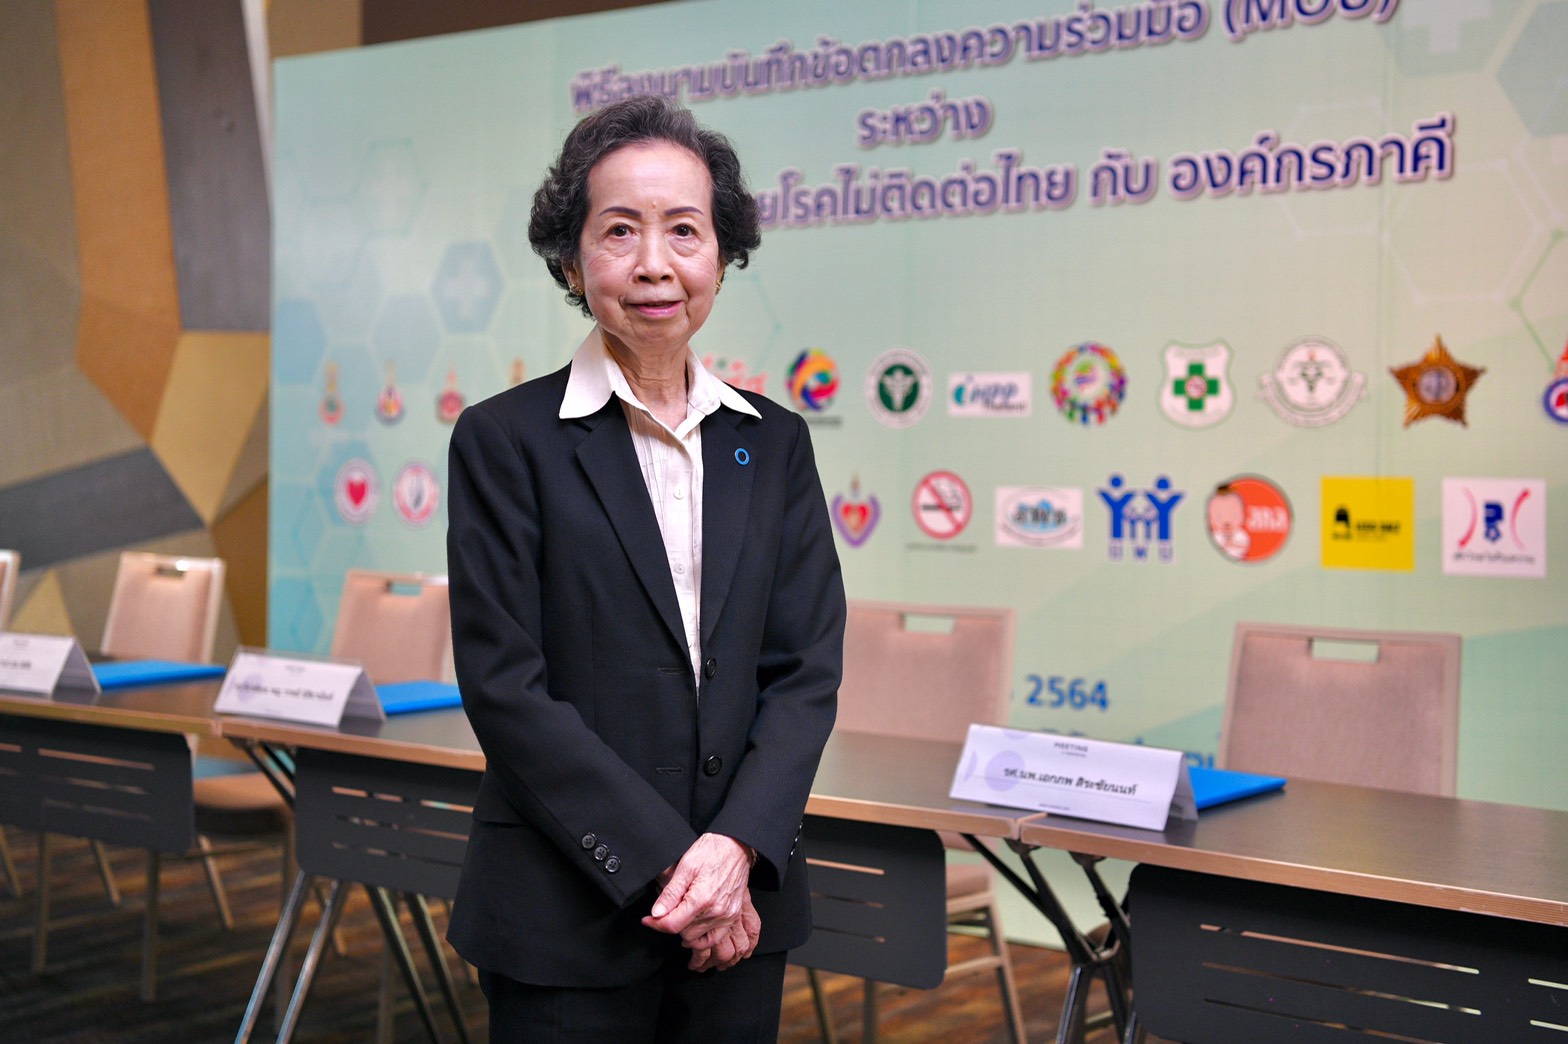 ThaiHealth pushes NCD Prevention Policy to National Agenda thaihealth